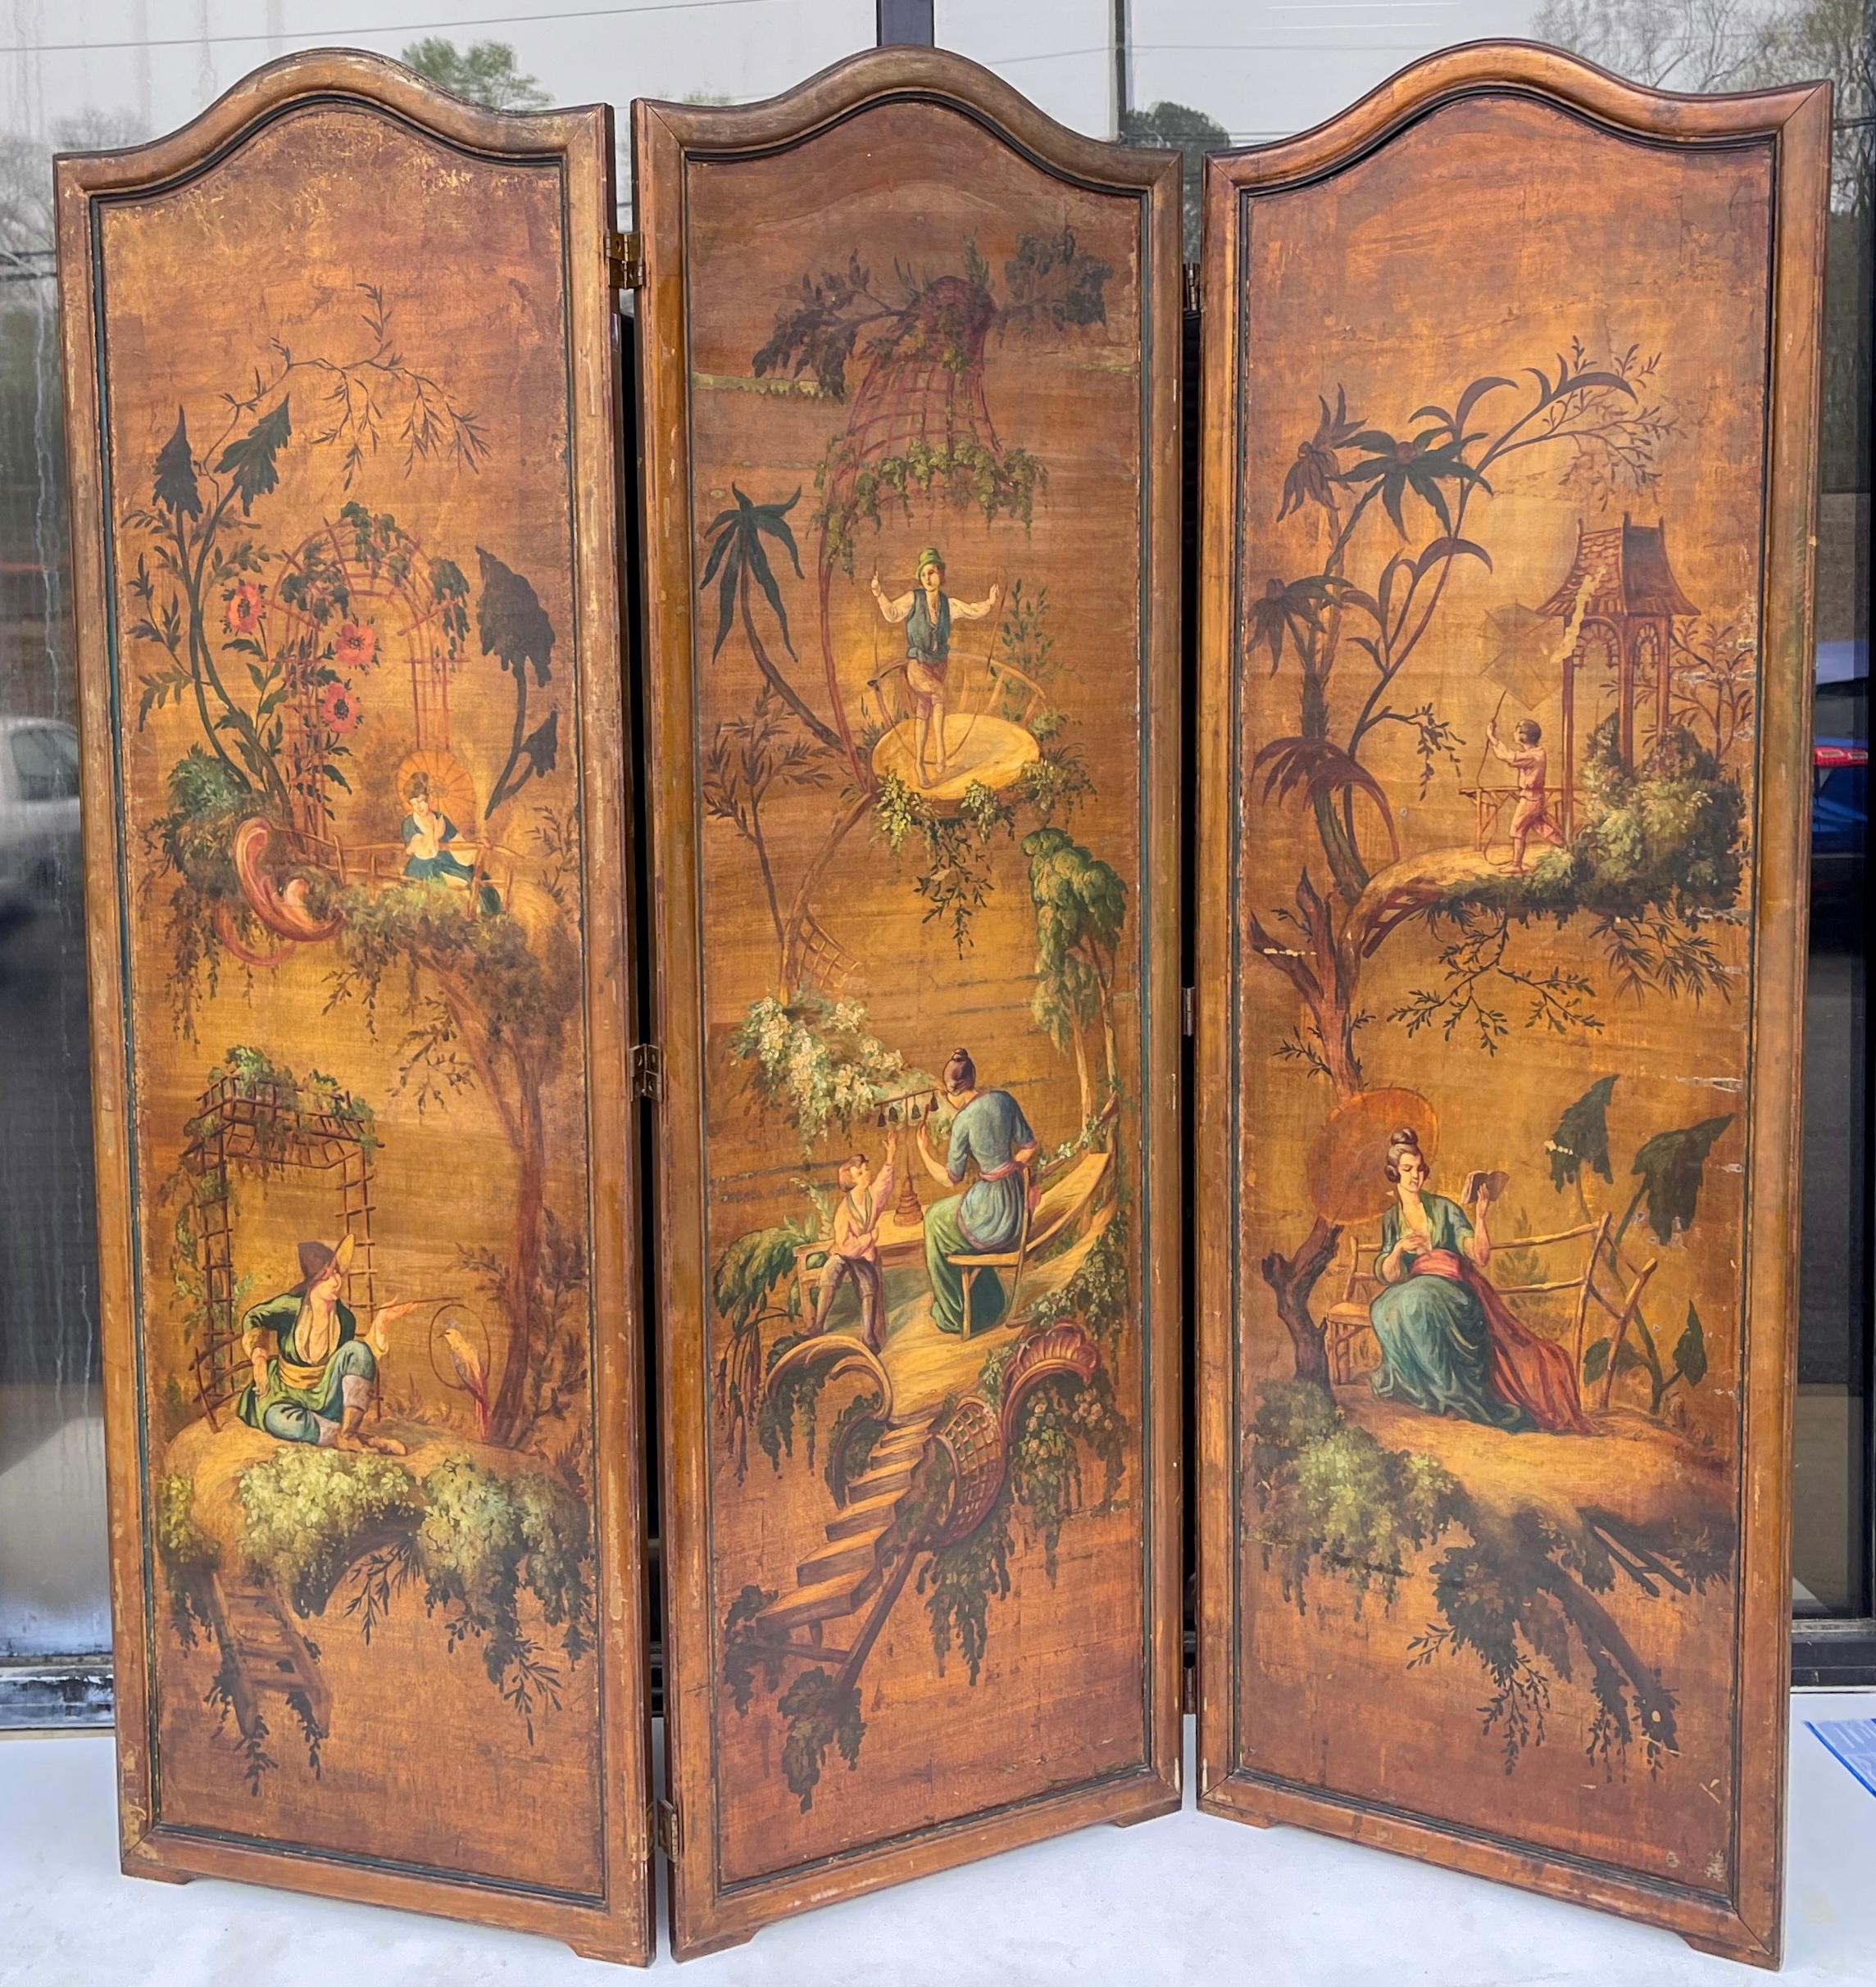 Early 20th-C. Hand Painted French Chinoiserie Oil On Canvas Screen - 3 Panels  For Sale 1